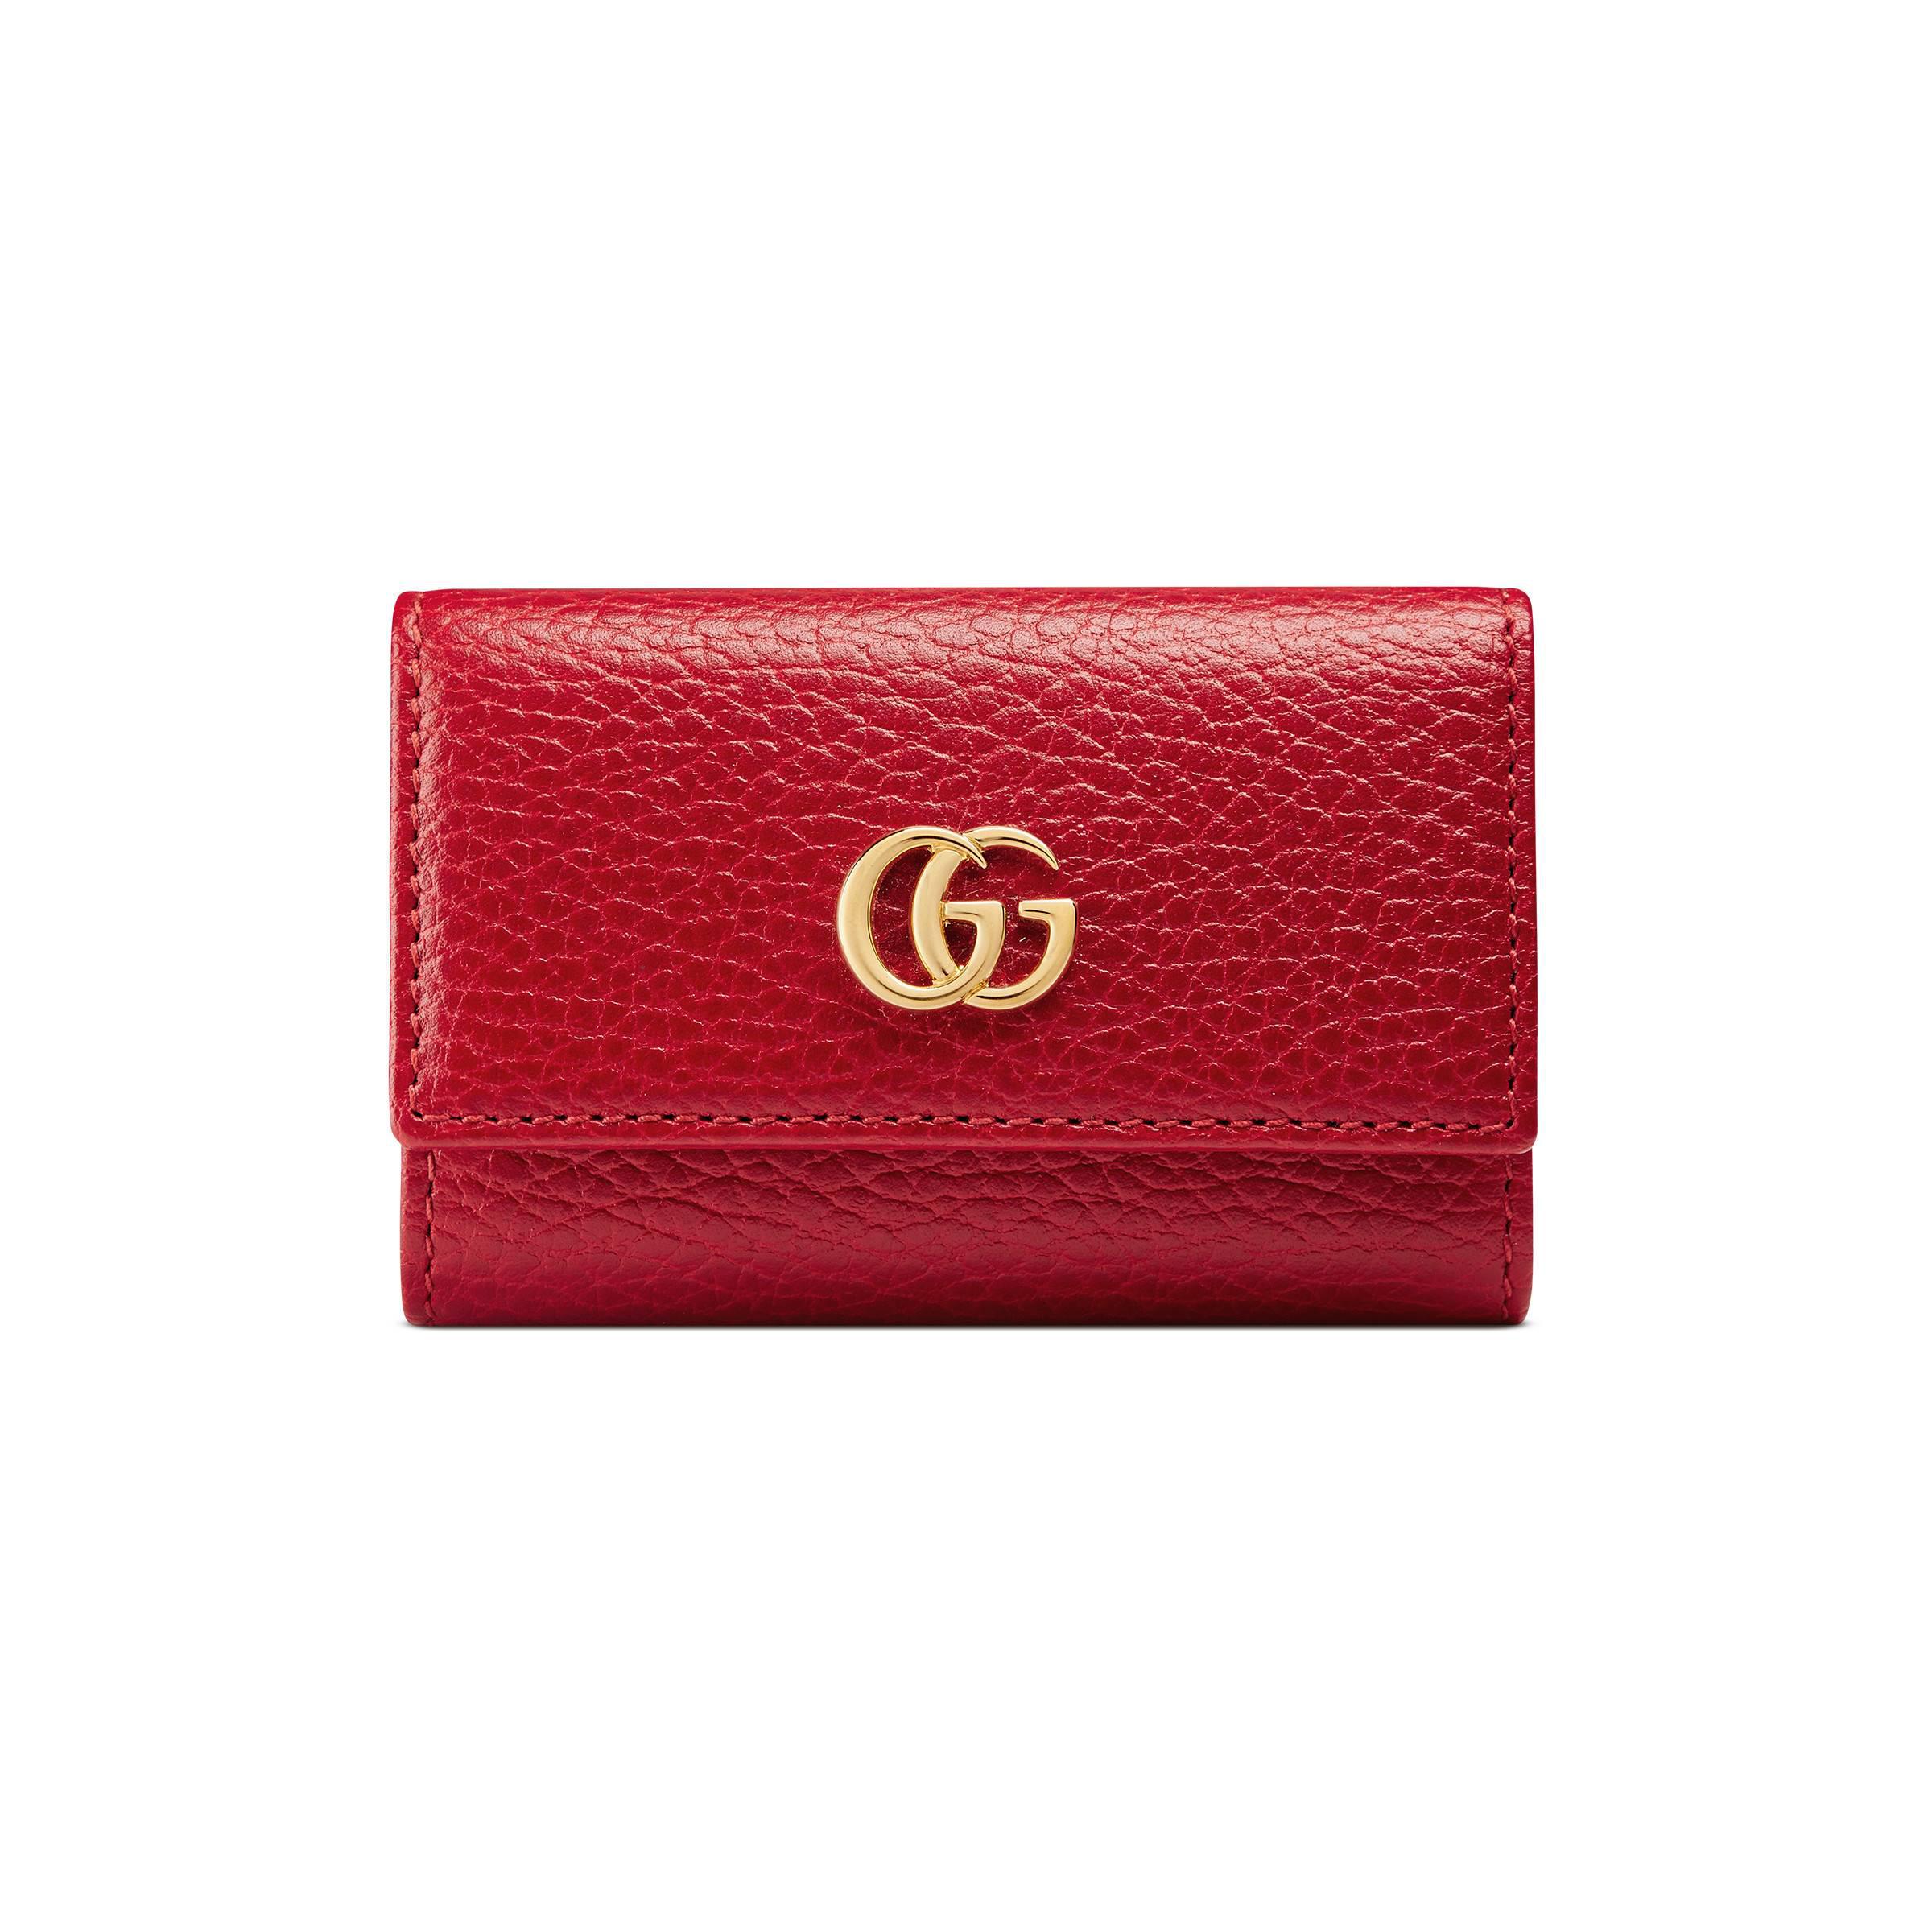 Gucci Leather Key Case in Red - Lyst